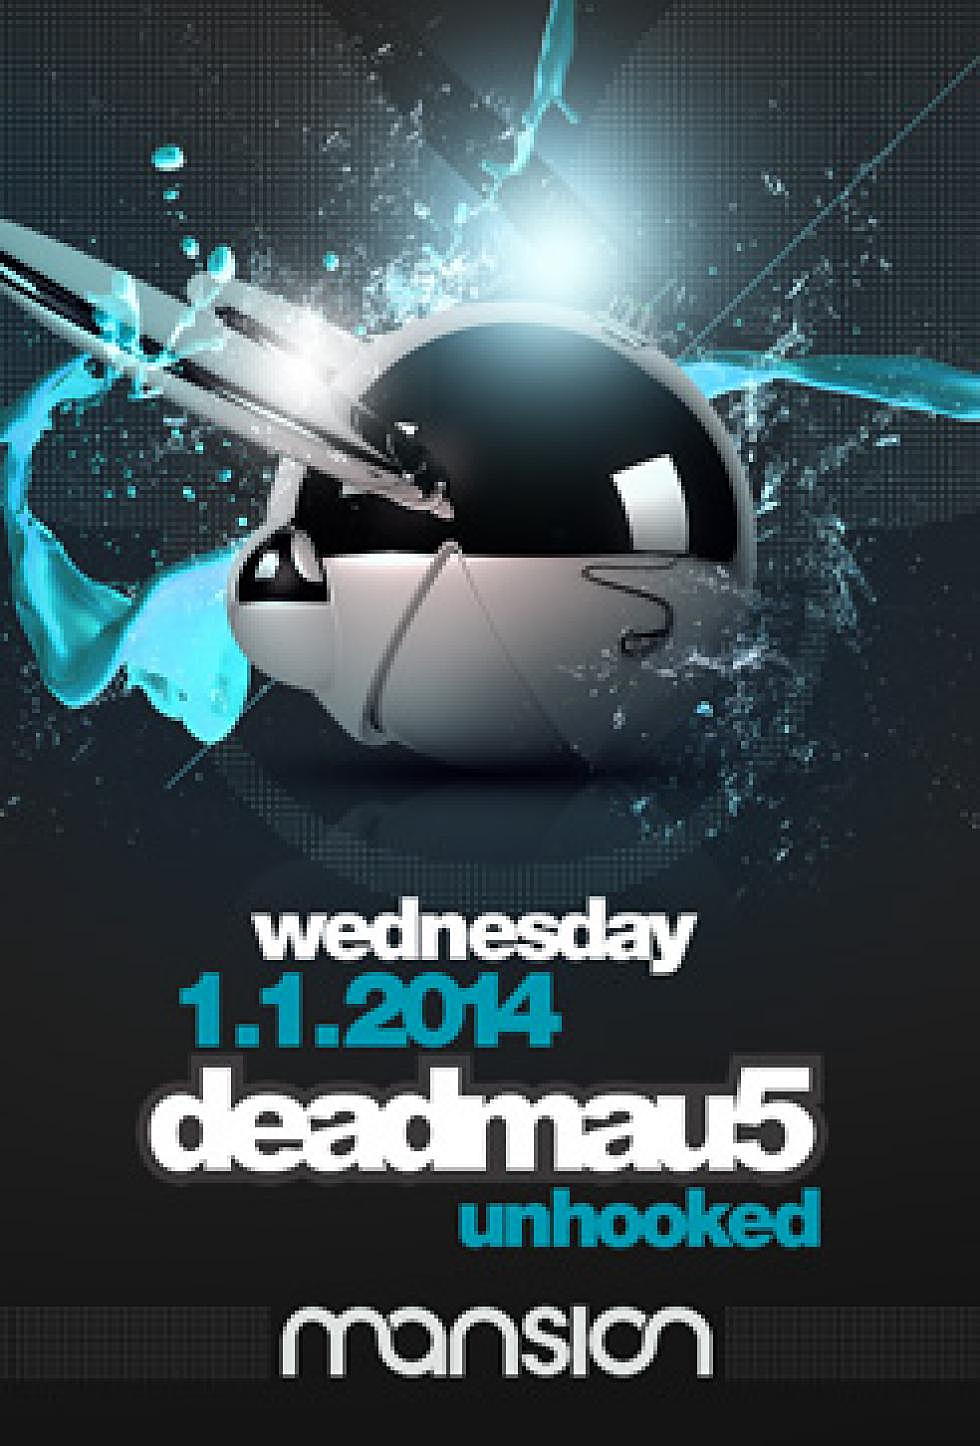 Get ready for deadmau5: Unhooked with the &#8216;We Are Friends, Vol. 2&#8242; compilation